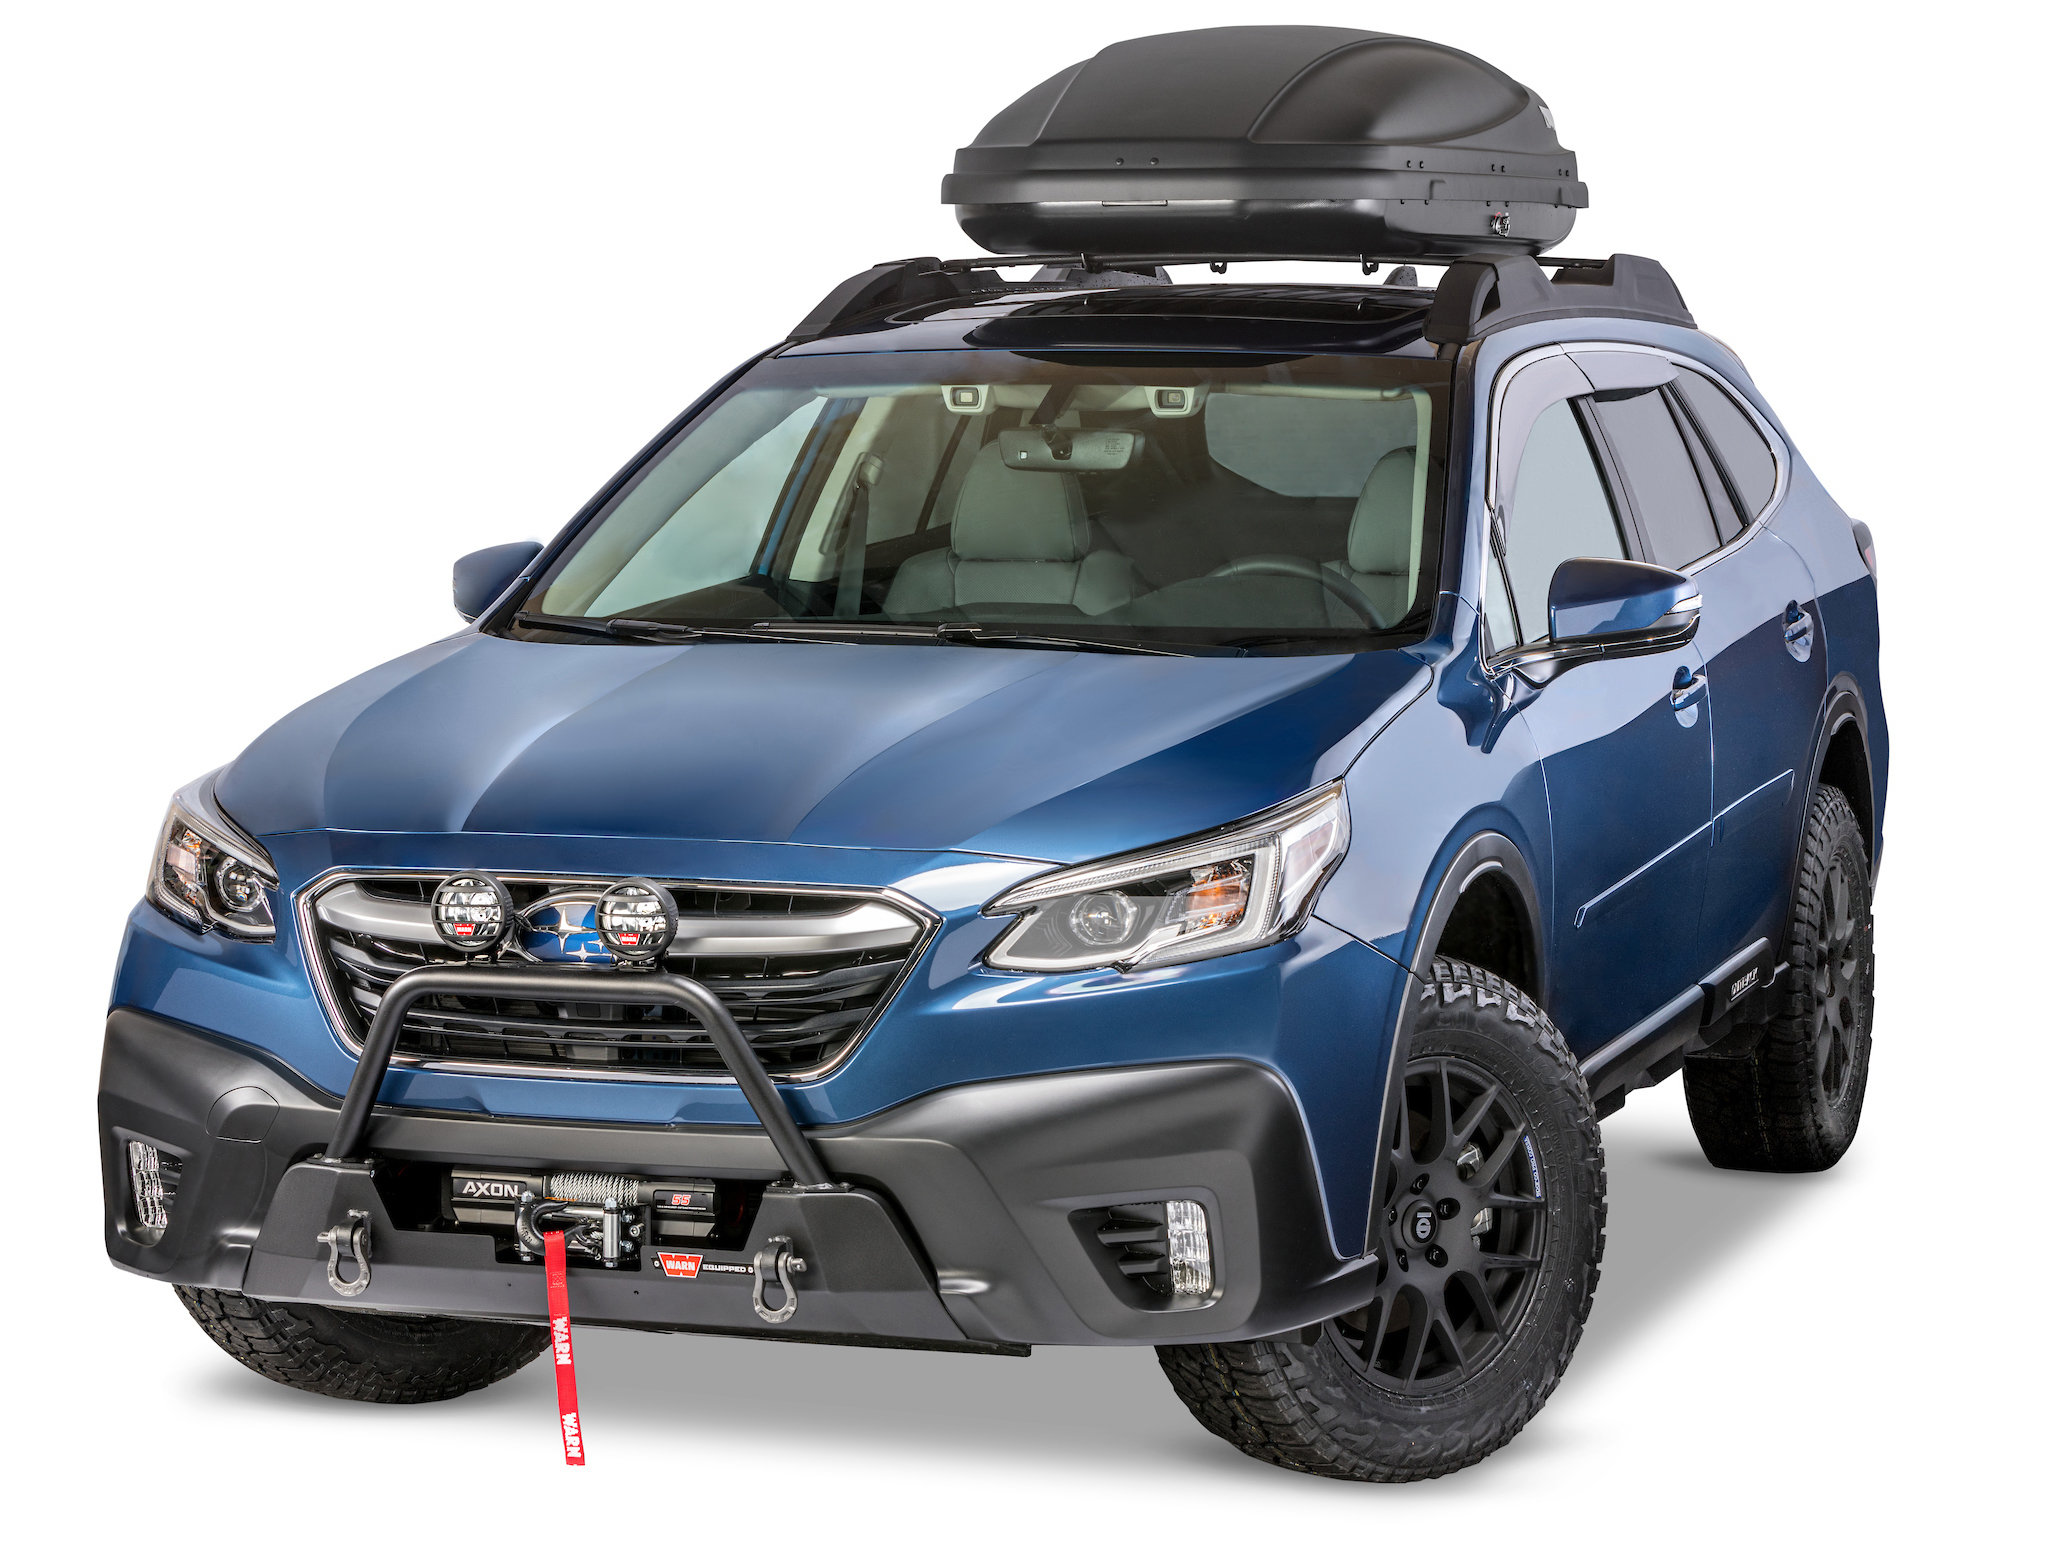 Warn Industries mounting kit Forester Outback 2020 2019